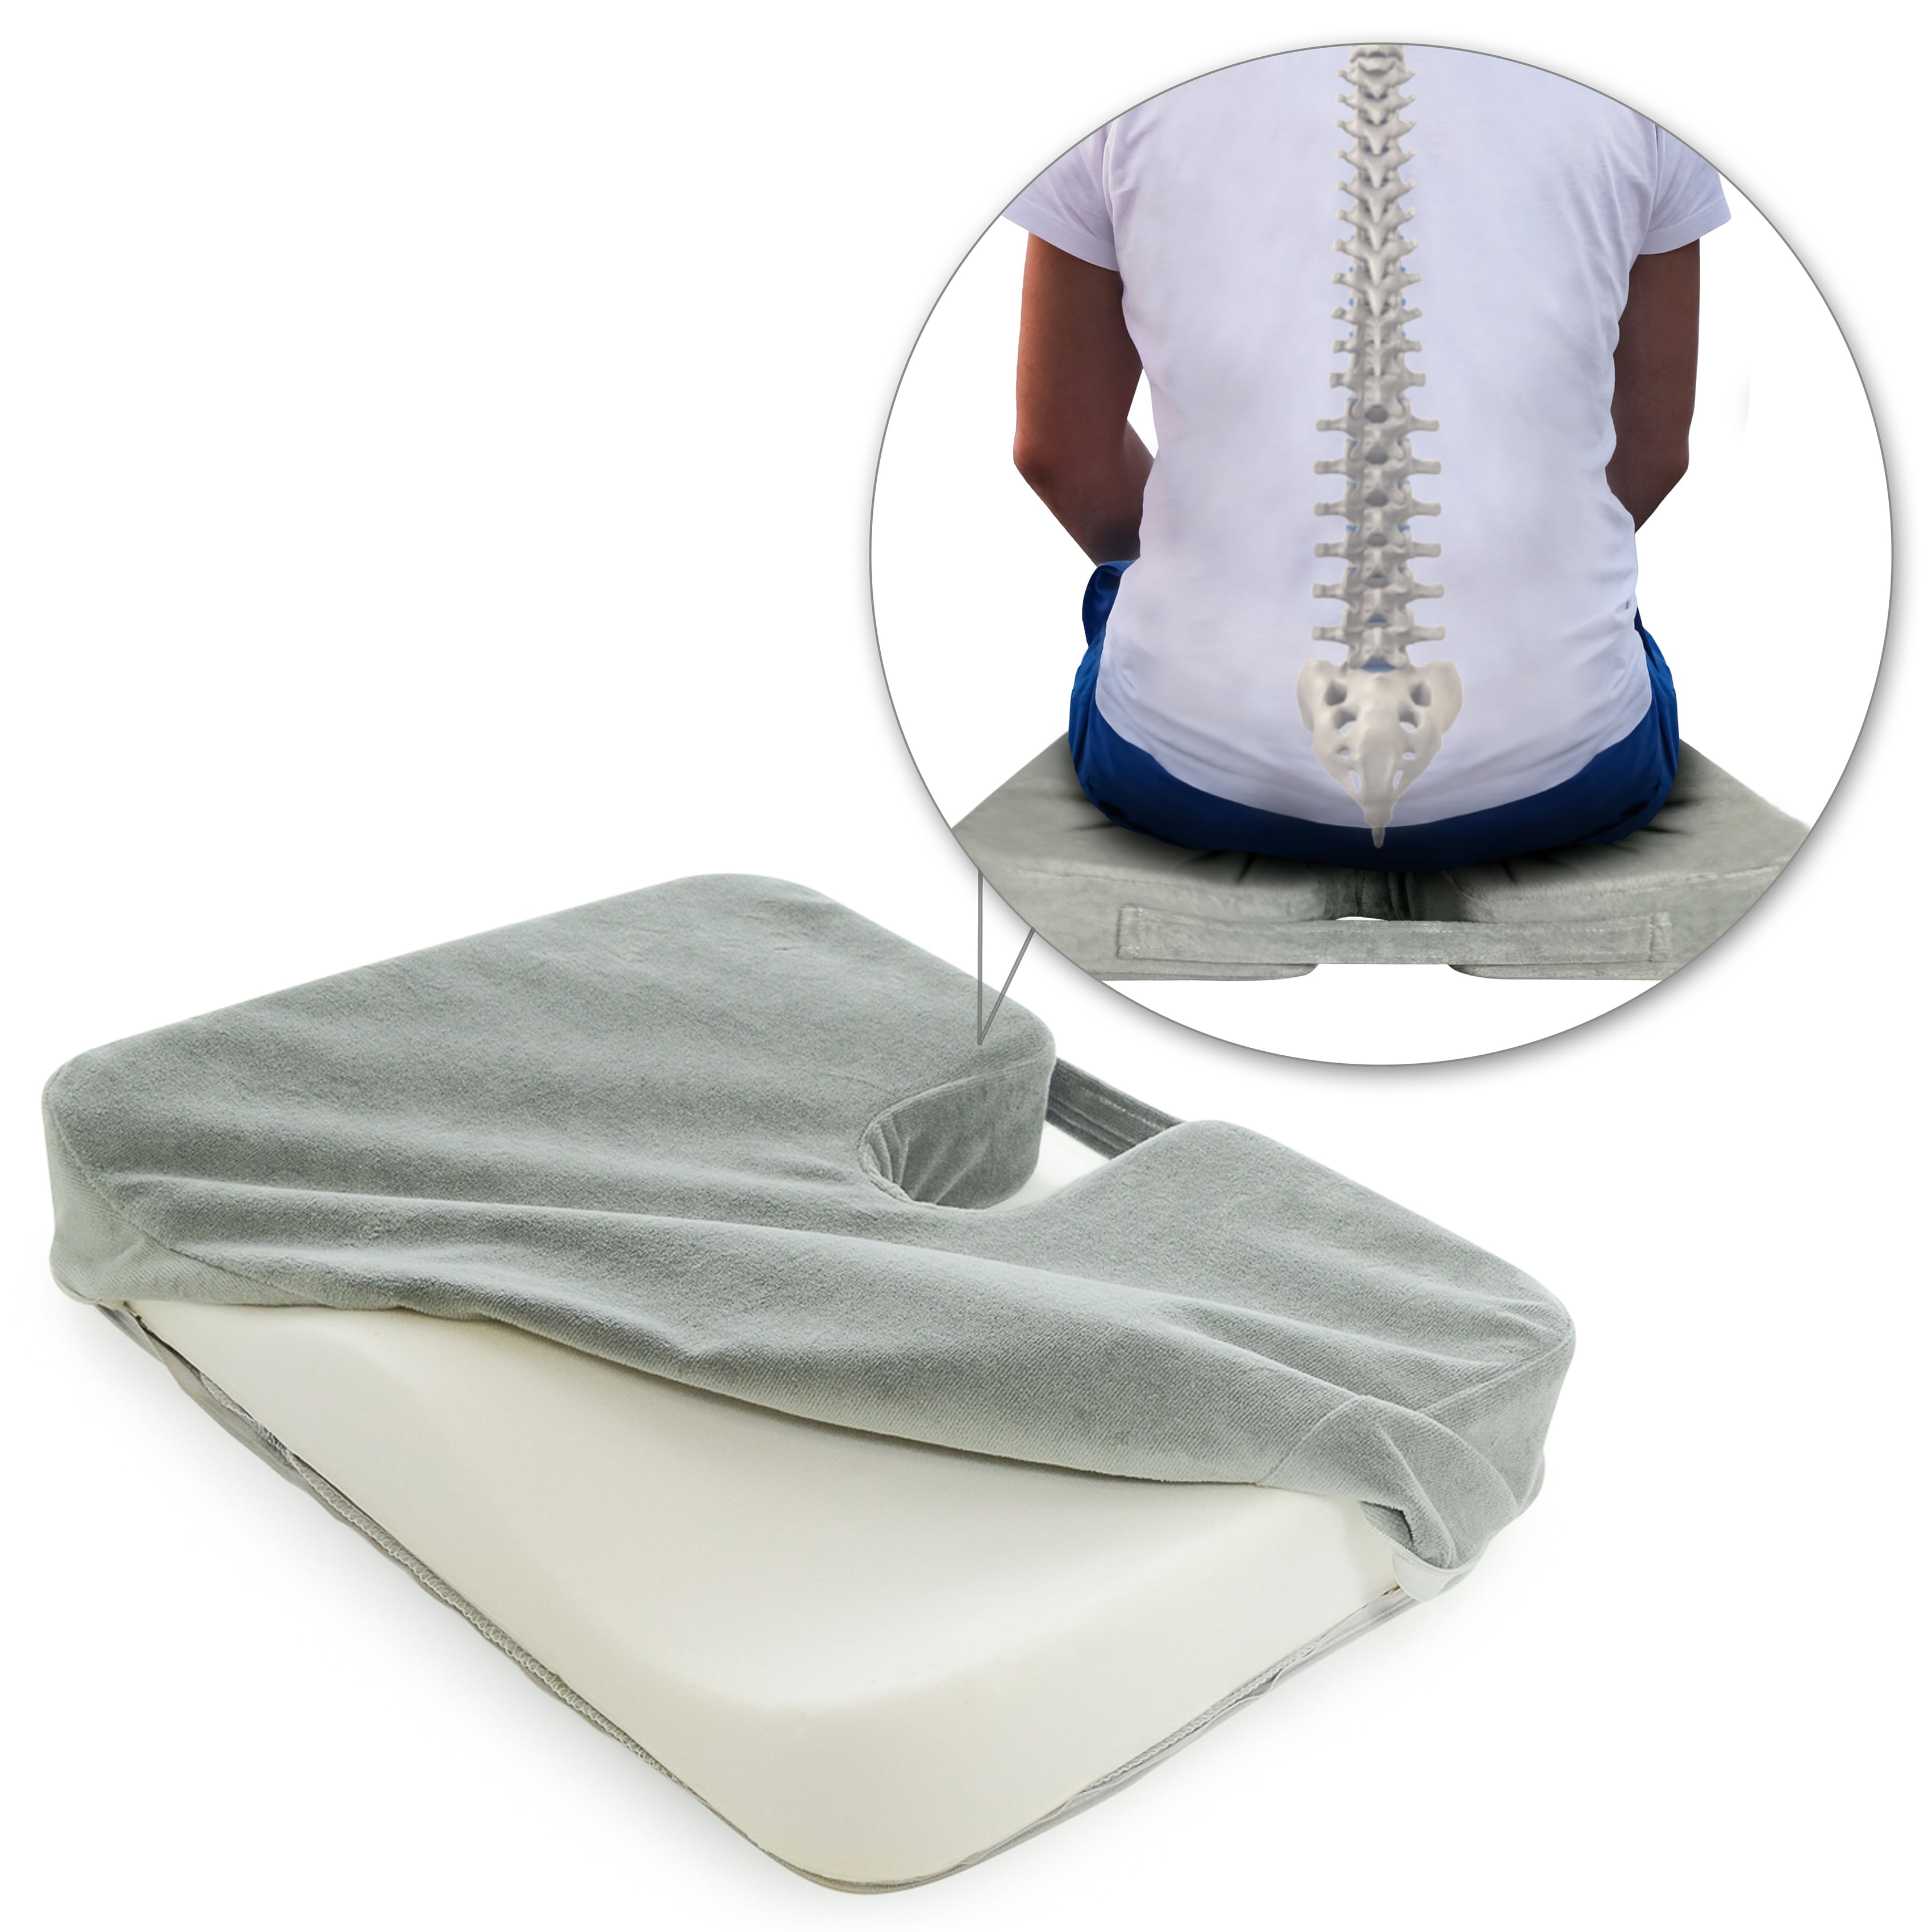 wedge pillow for tailbone pain